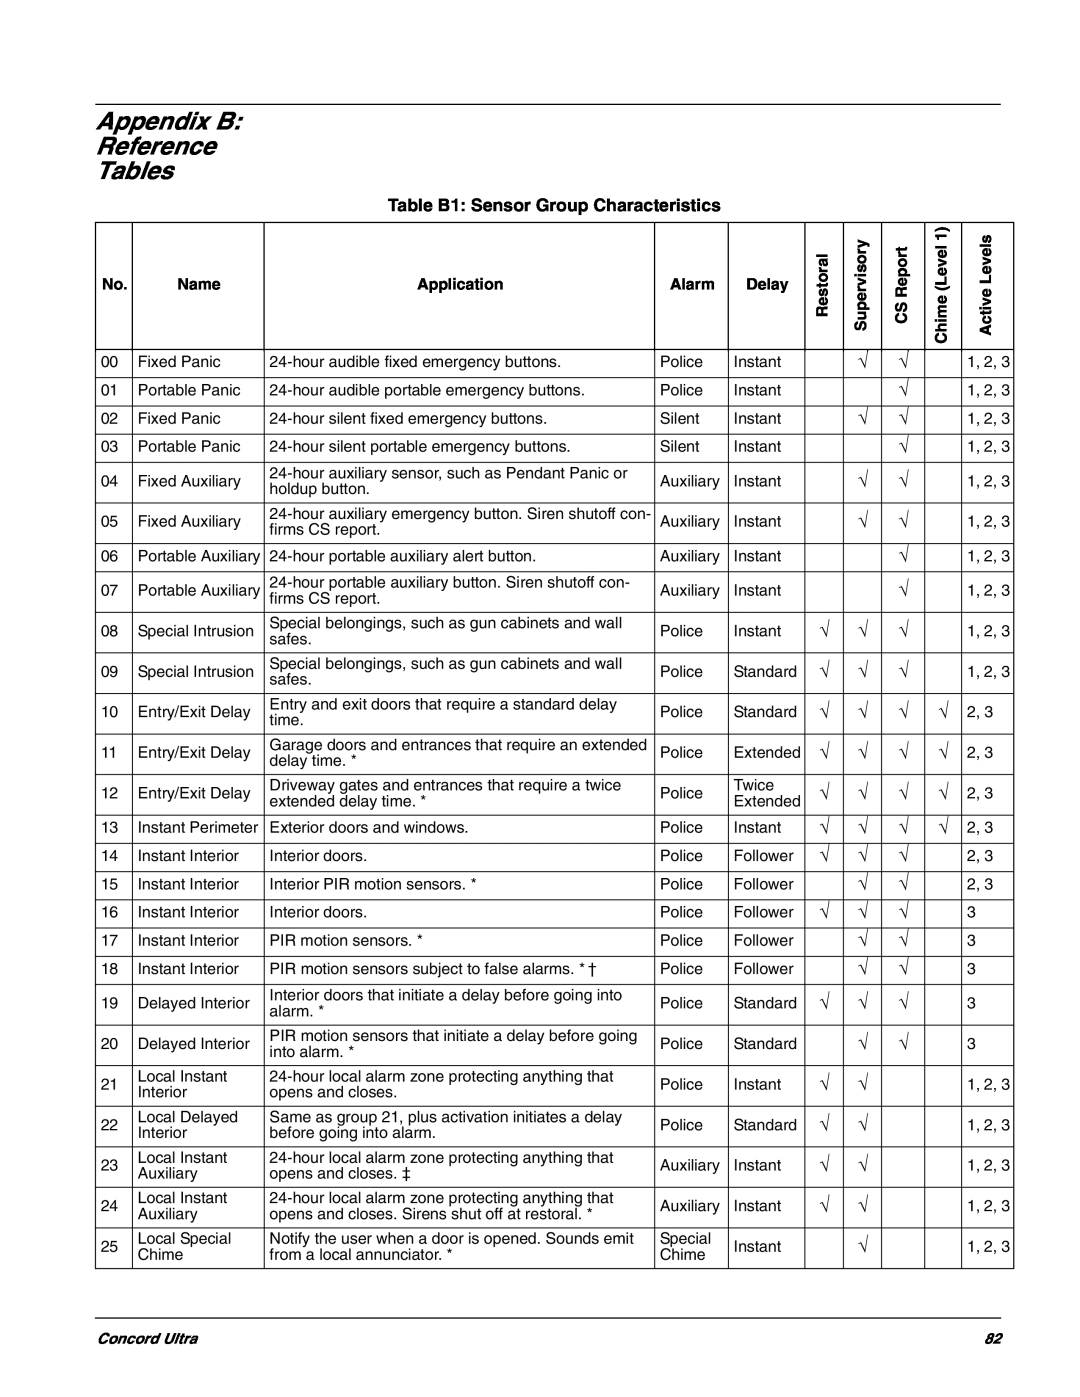 GE 60-960-95 installation instructions Appendix B Reference Tables 